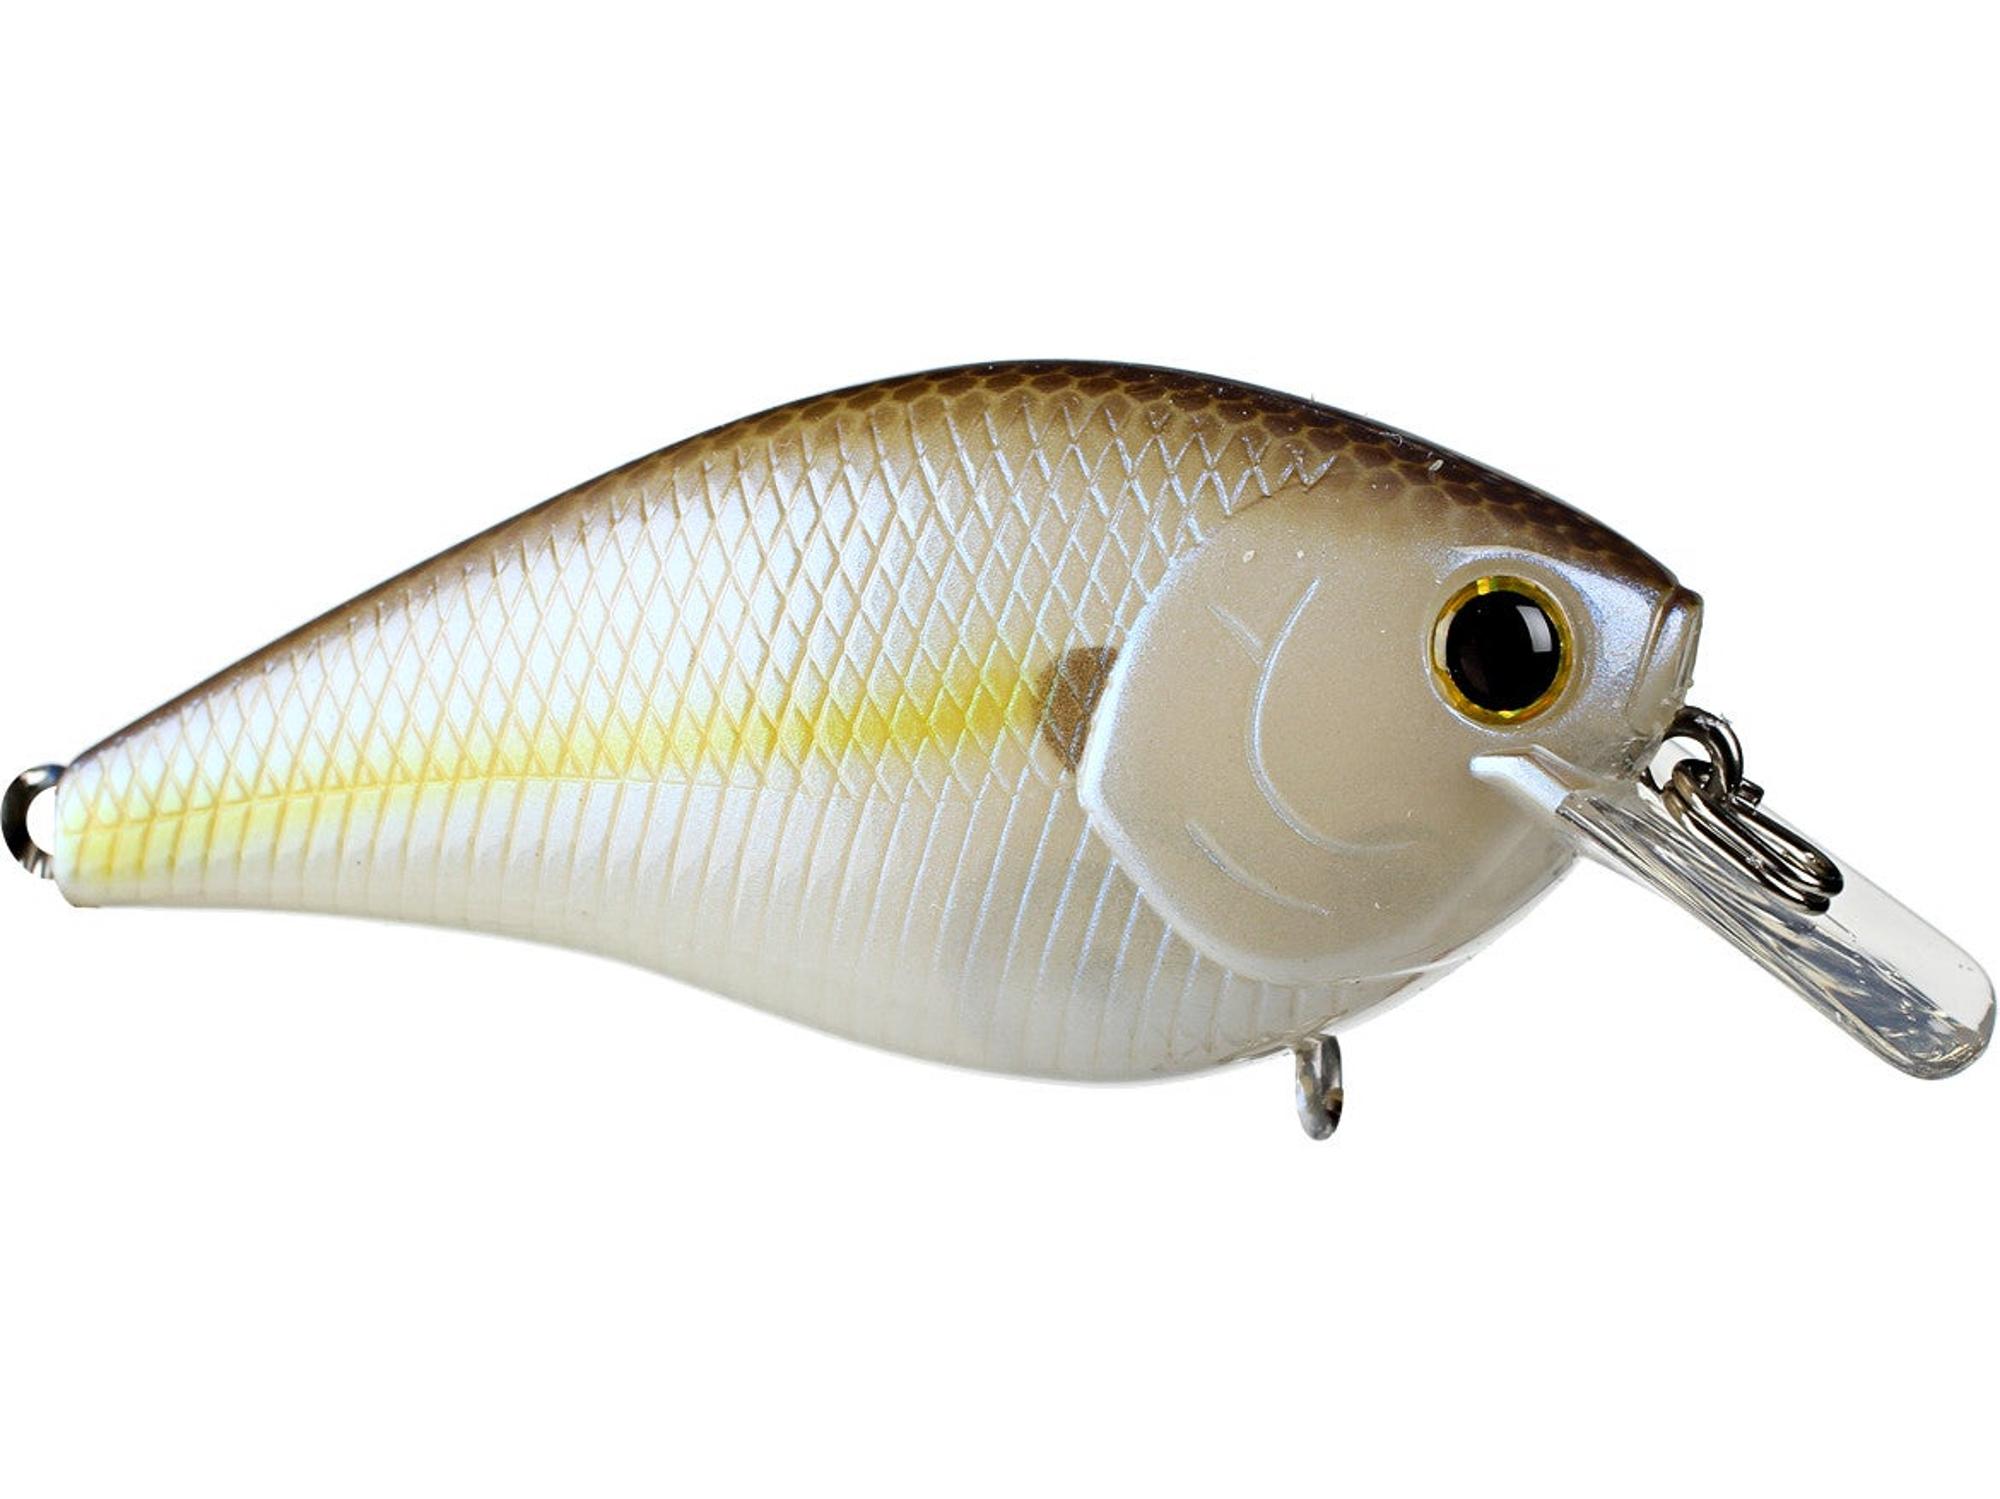 Luckycraft Lc4.5 Drs Crankbait Luc- Lc4.5drs To Shad